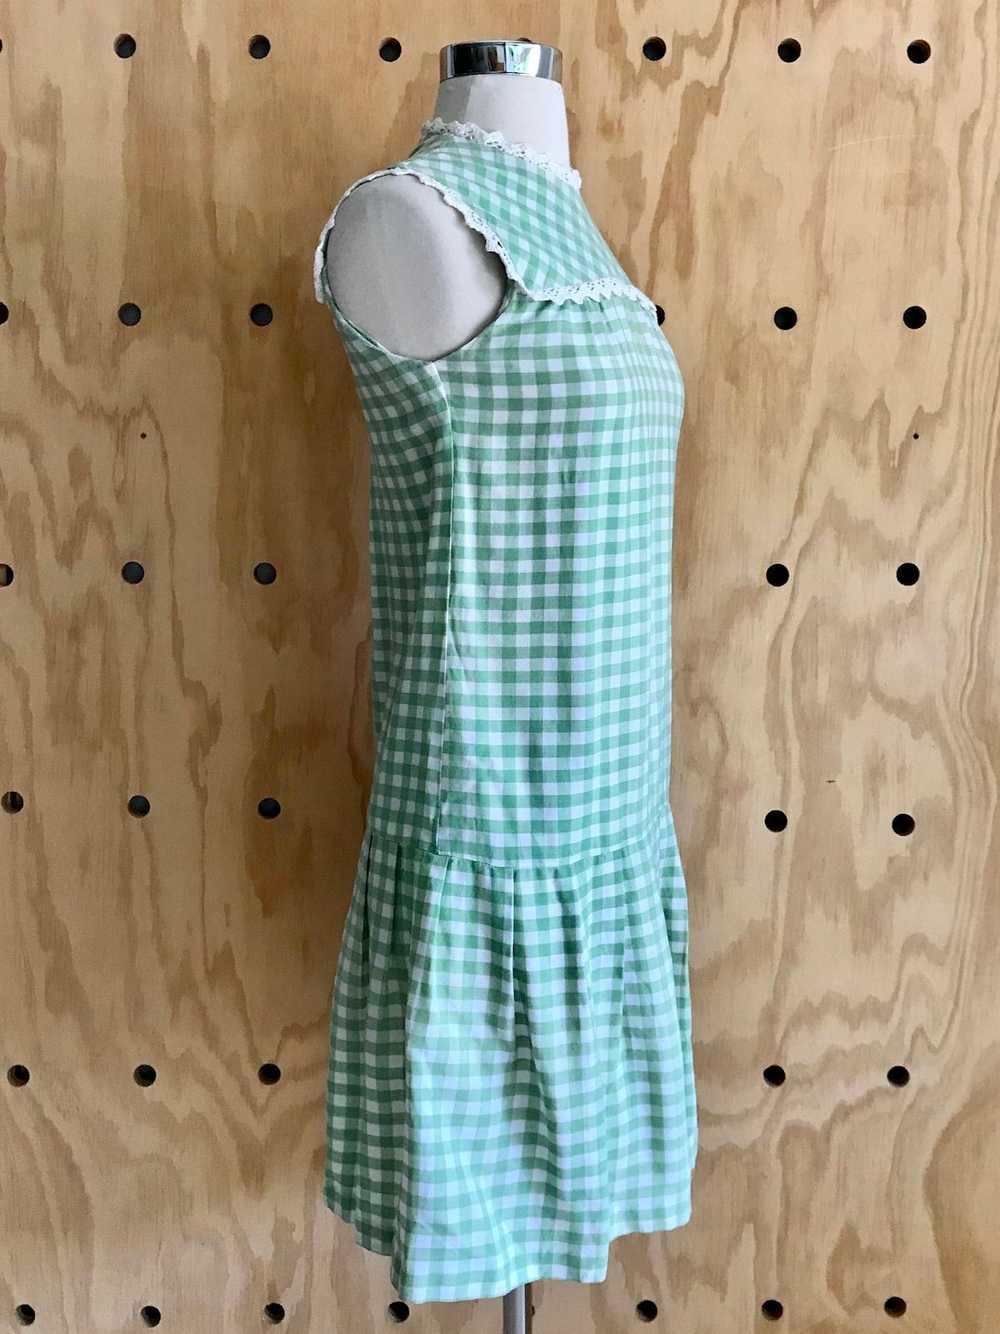 1960s Green Gingham Shift (XS/S) - image 1